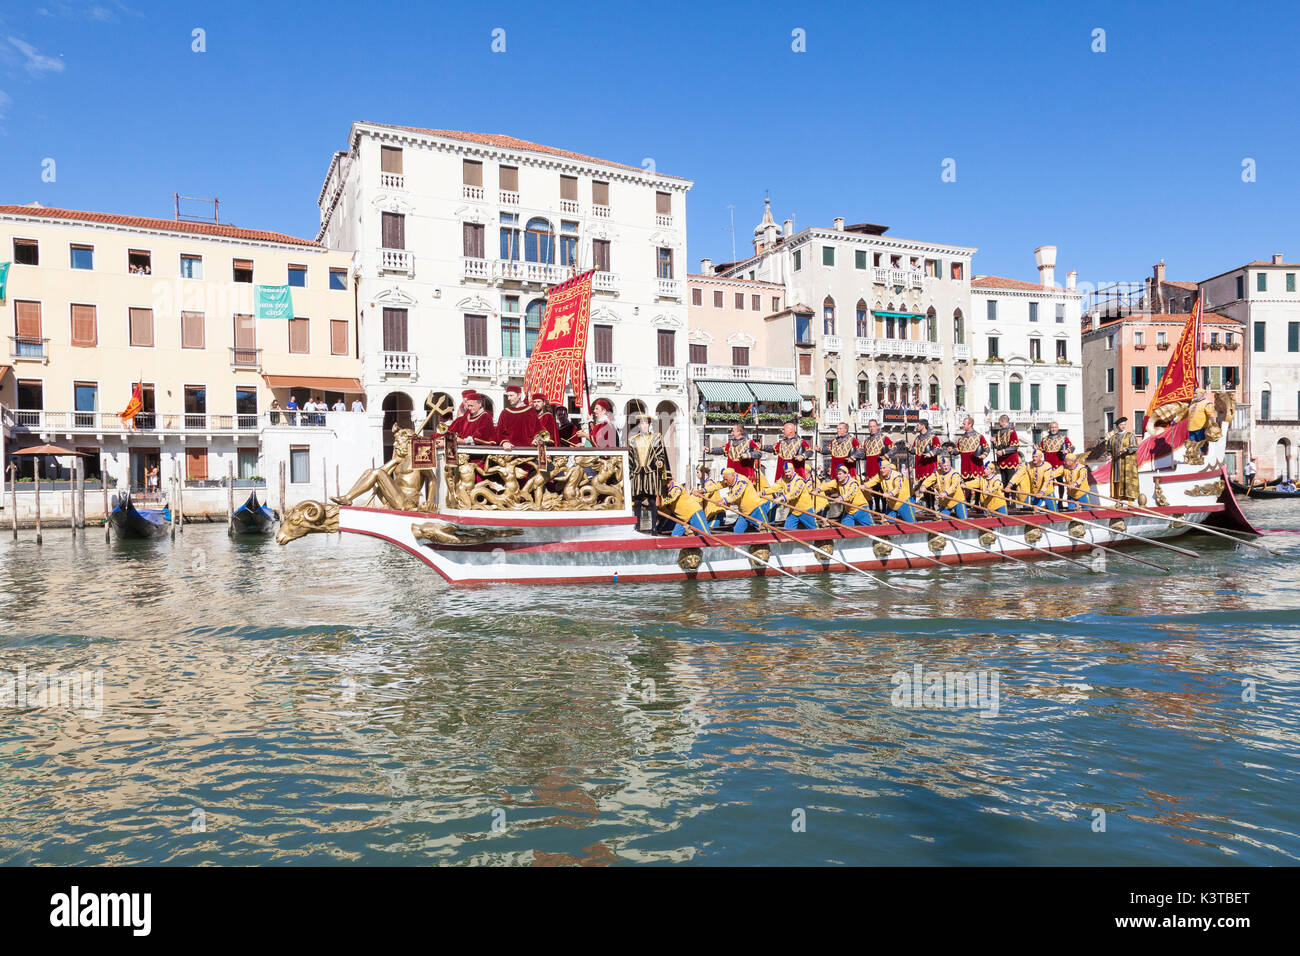 Venice, Veneto, Italy. 3rd September 2017. Boats participating in the Regata Storica, a re-enactment of a historical procession of boats carrying the Doge and highest ranking Venetian officials  in 1489 to welcome Caterina Cornaro, the wife of the King of Cyprus, who renounced her throne in favour of Venice. The procession is followed by  important  annual rowing regattas, the highlight of the Venice rowing season. Stock Photo